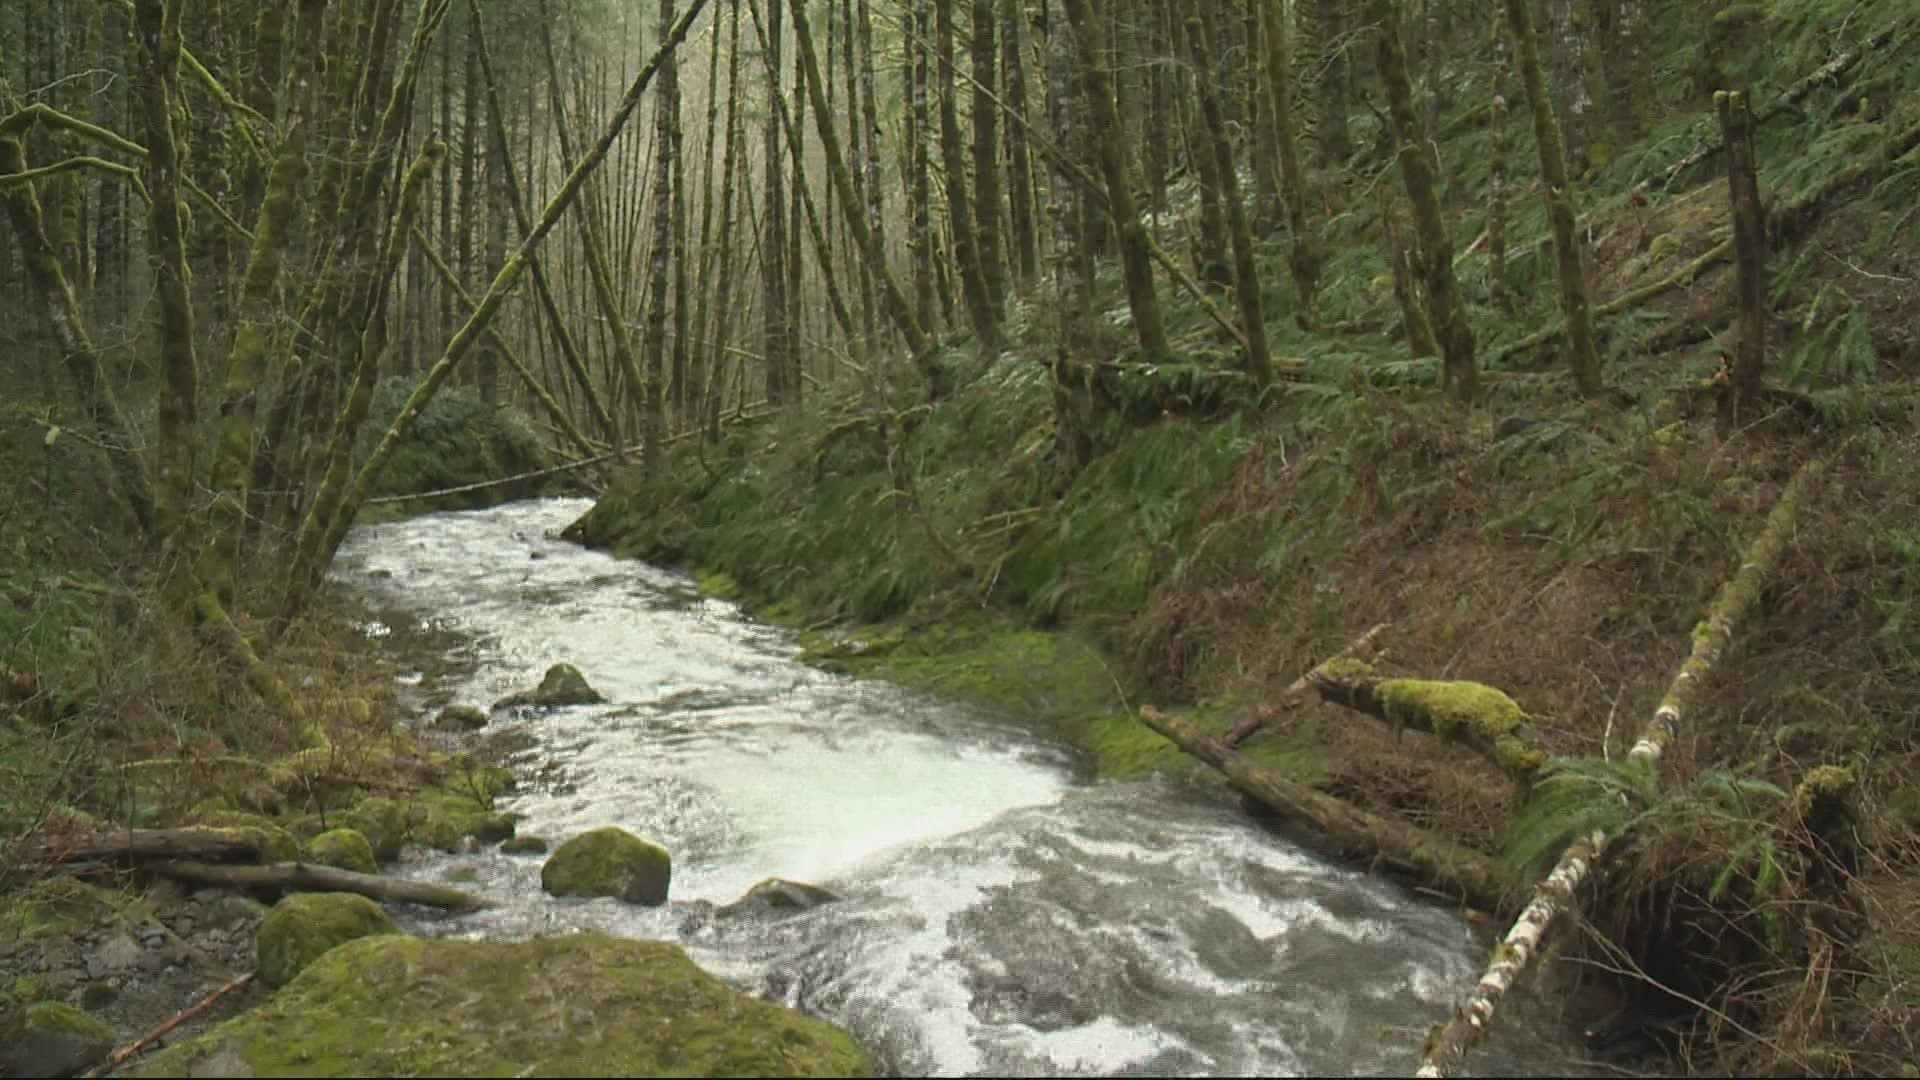 The creek adopted the name of a nearby logging camp set up during the Tillamook Burn, a series of massive forest fires that started in 1933.